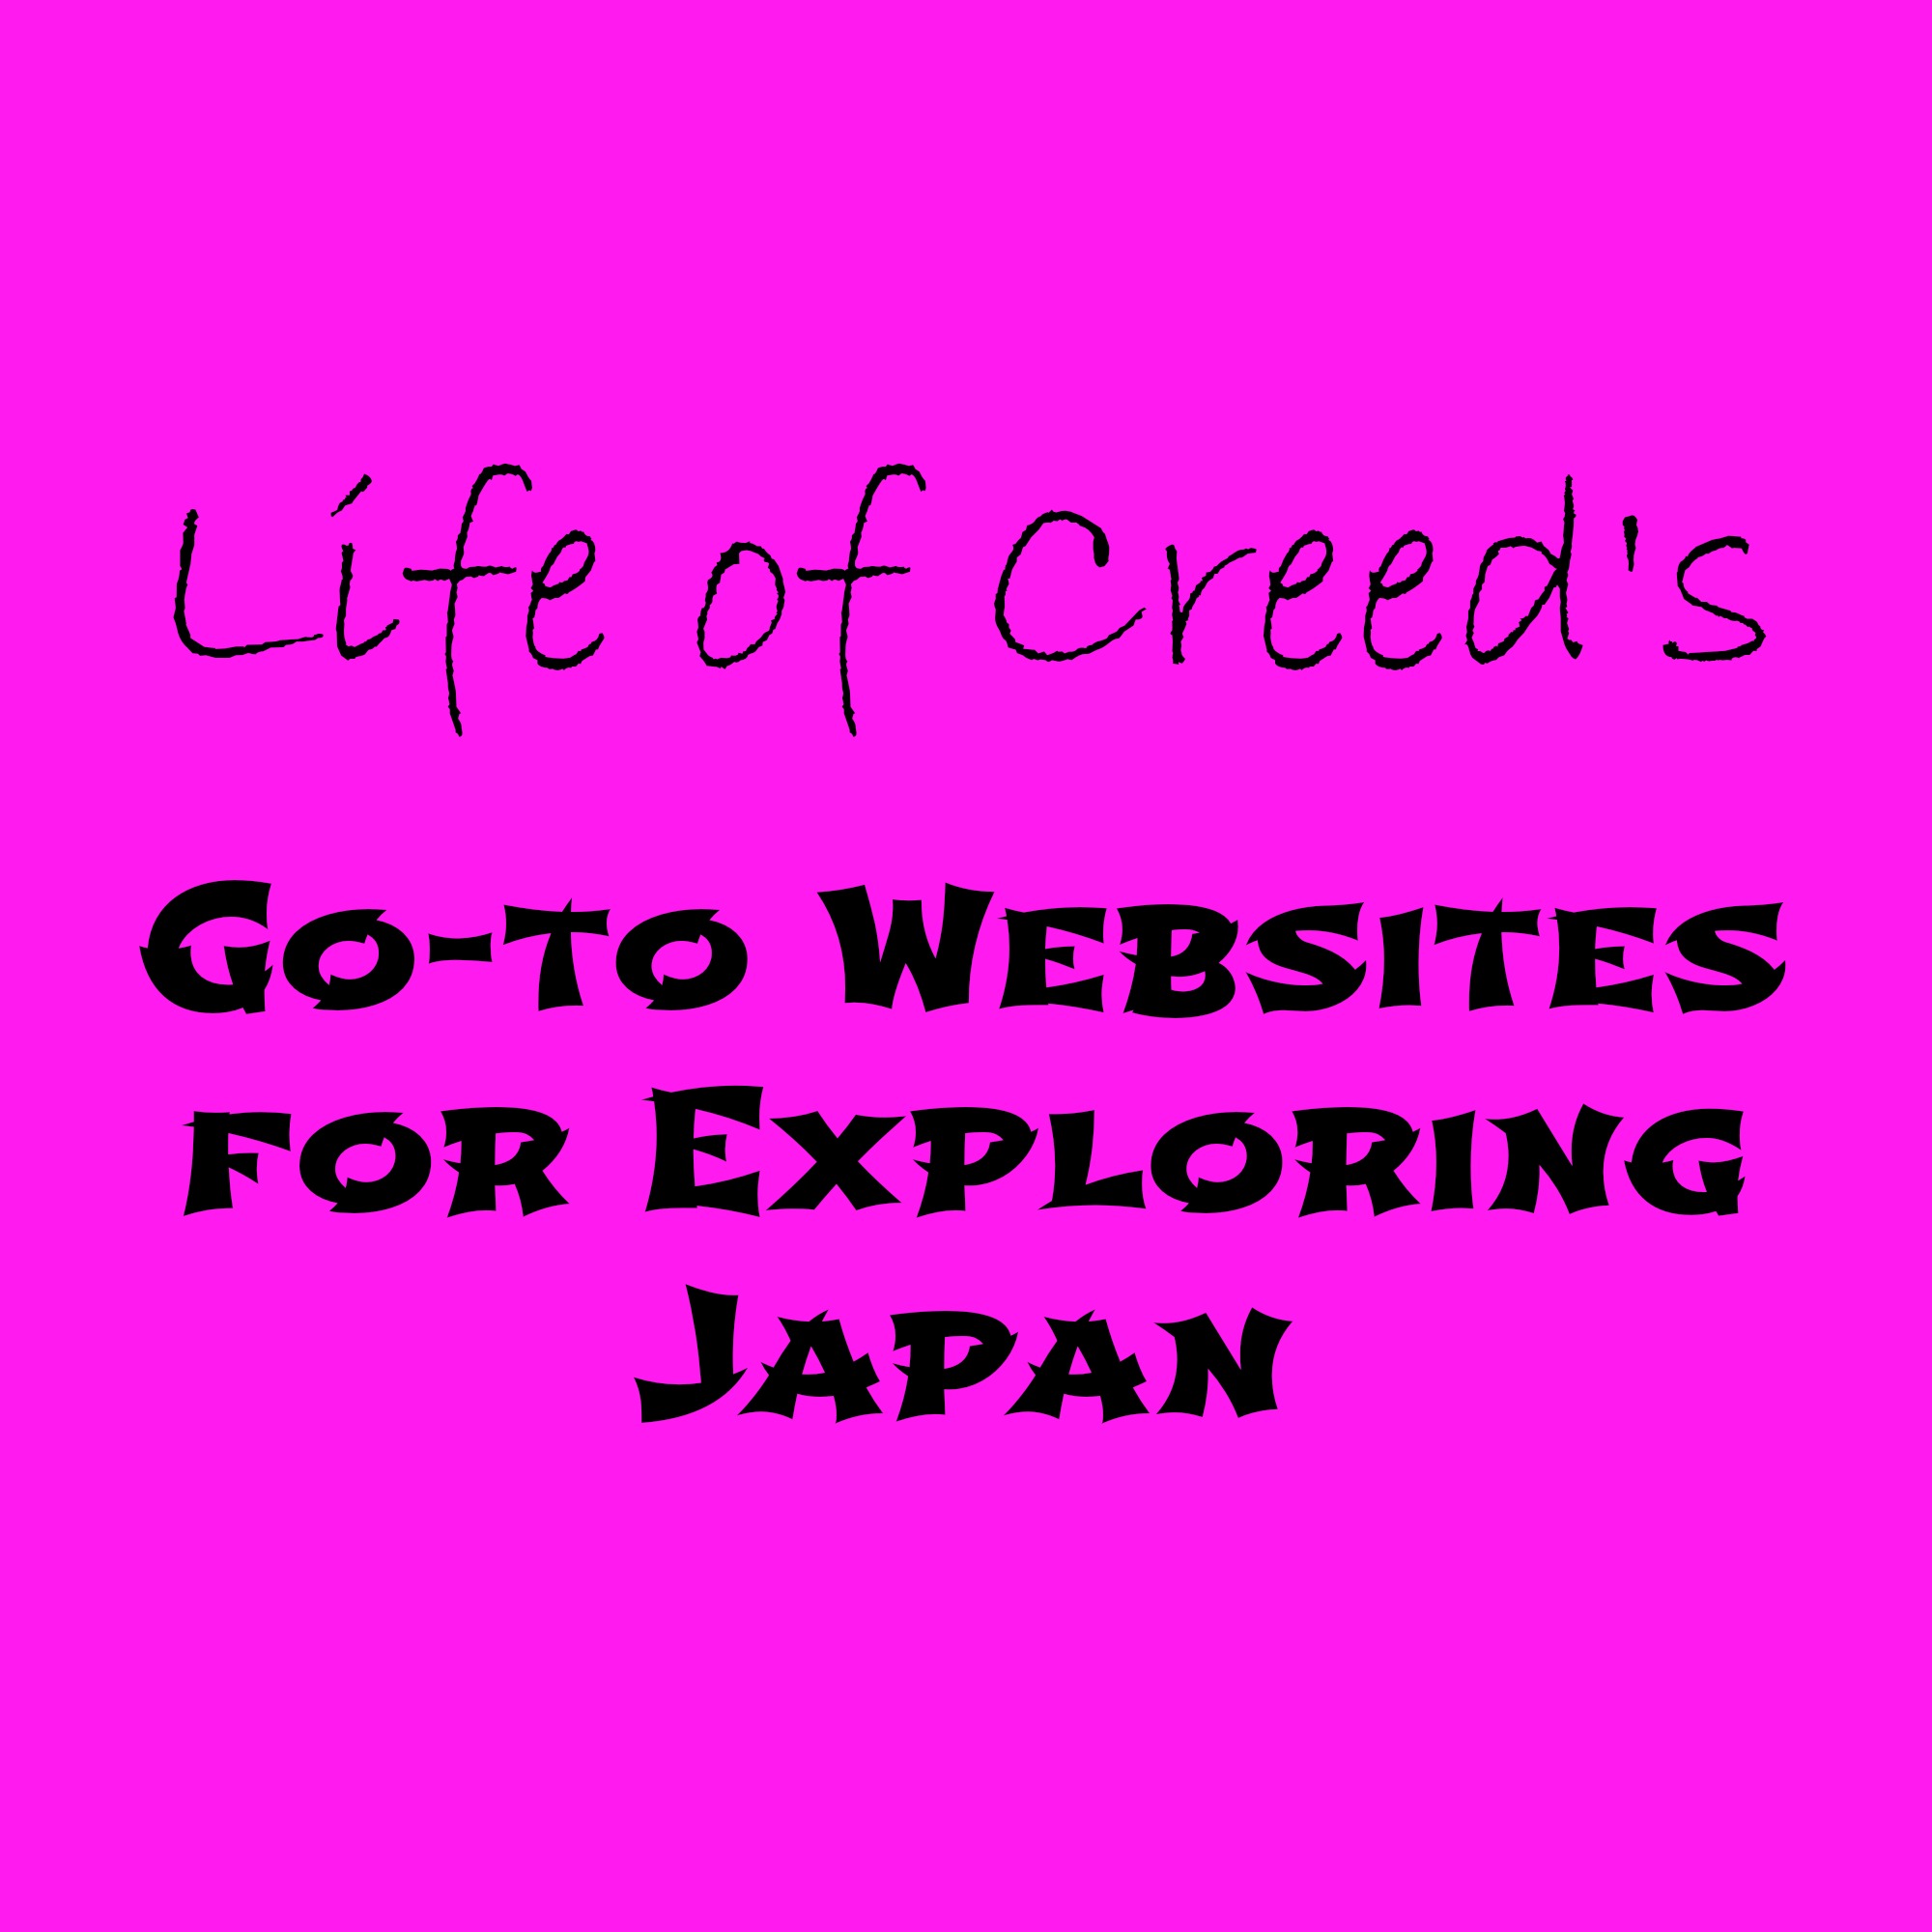 My Go-to websites for exploring Japan